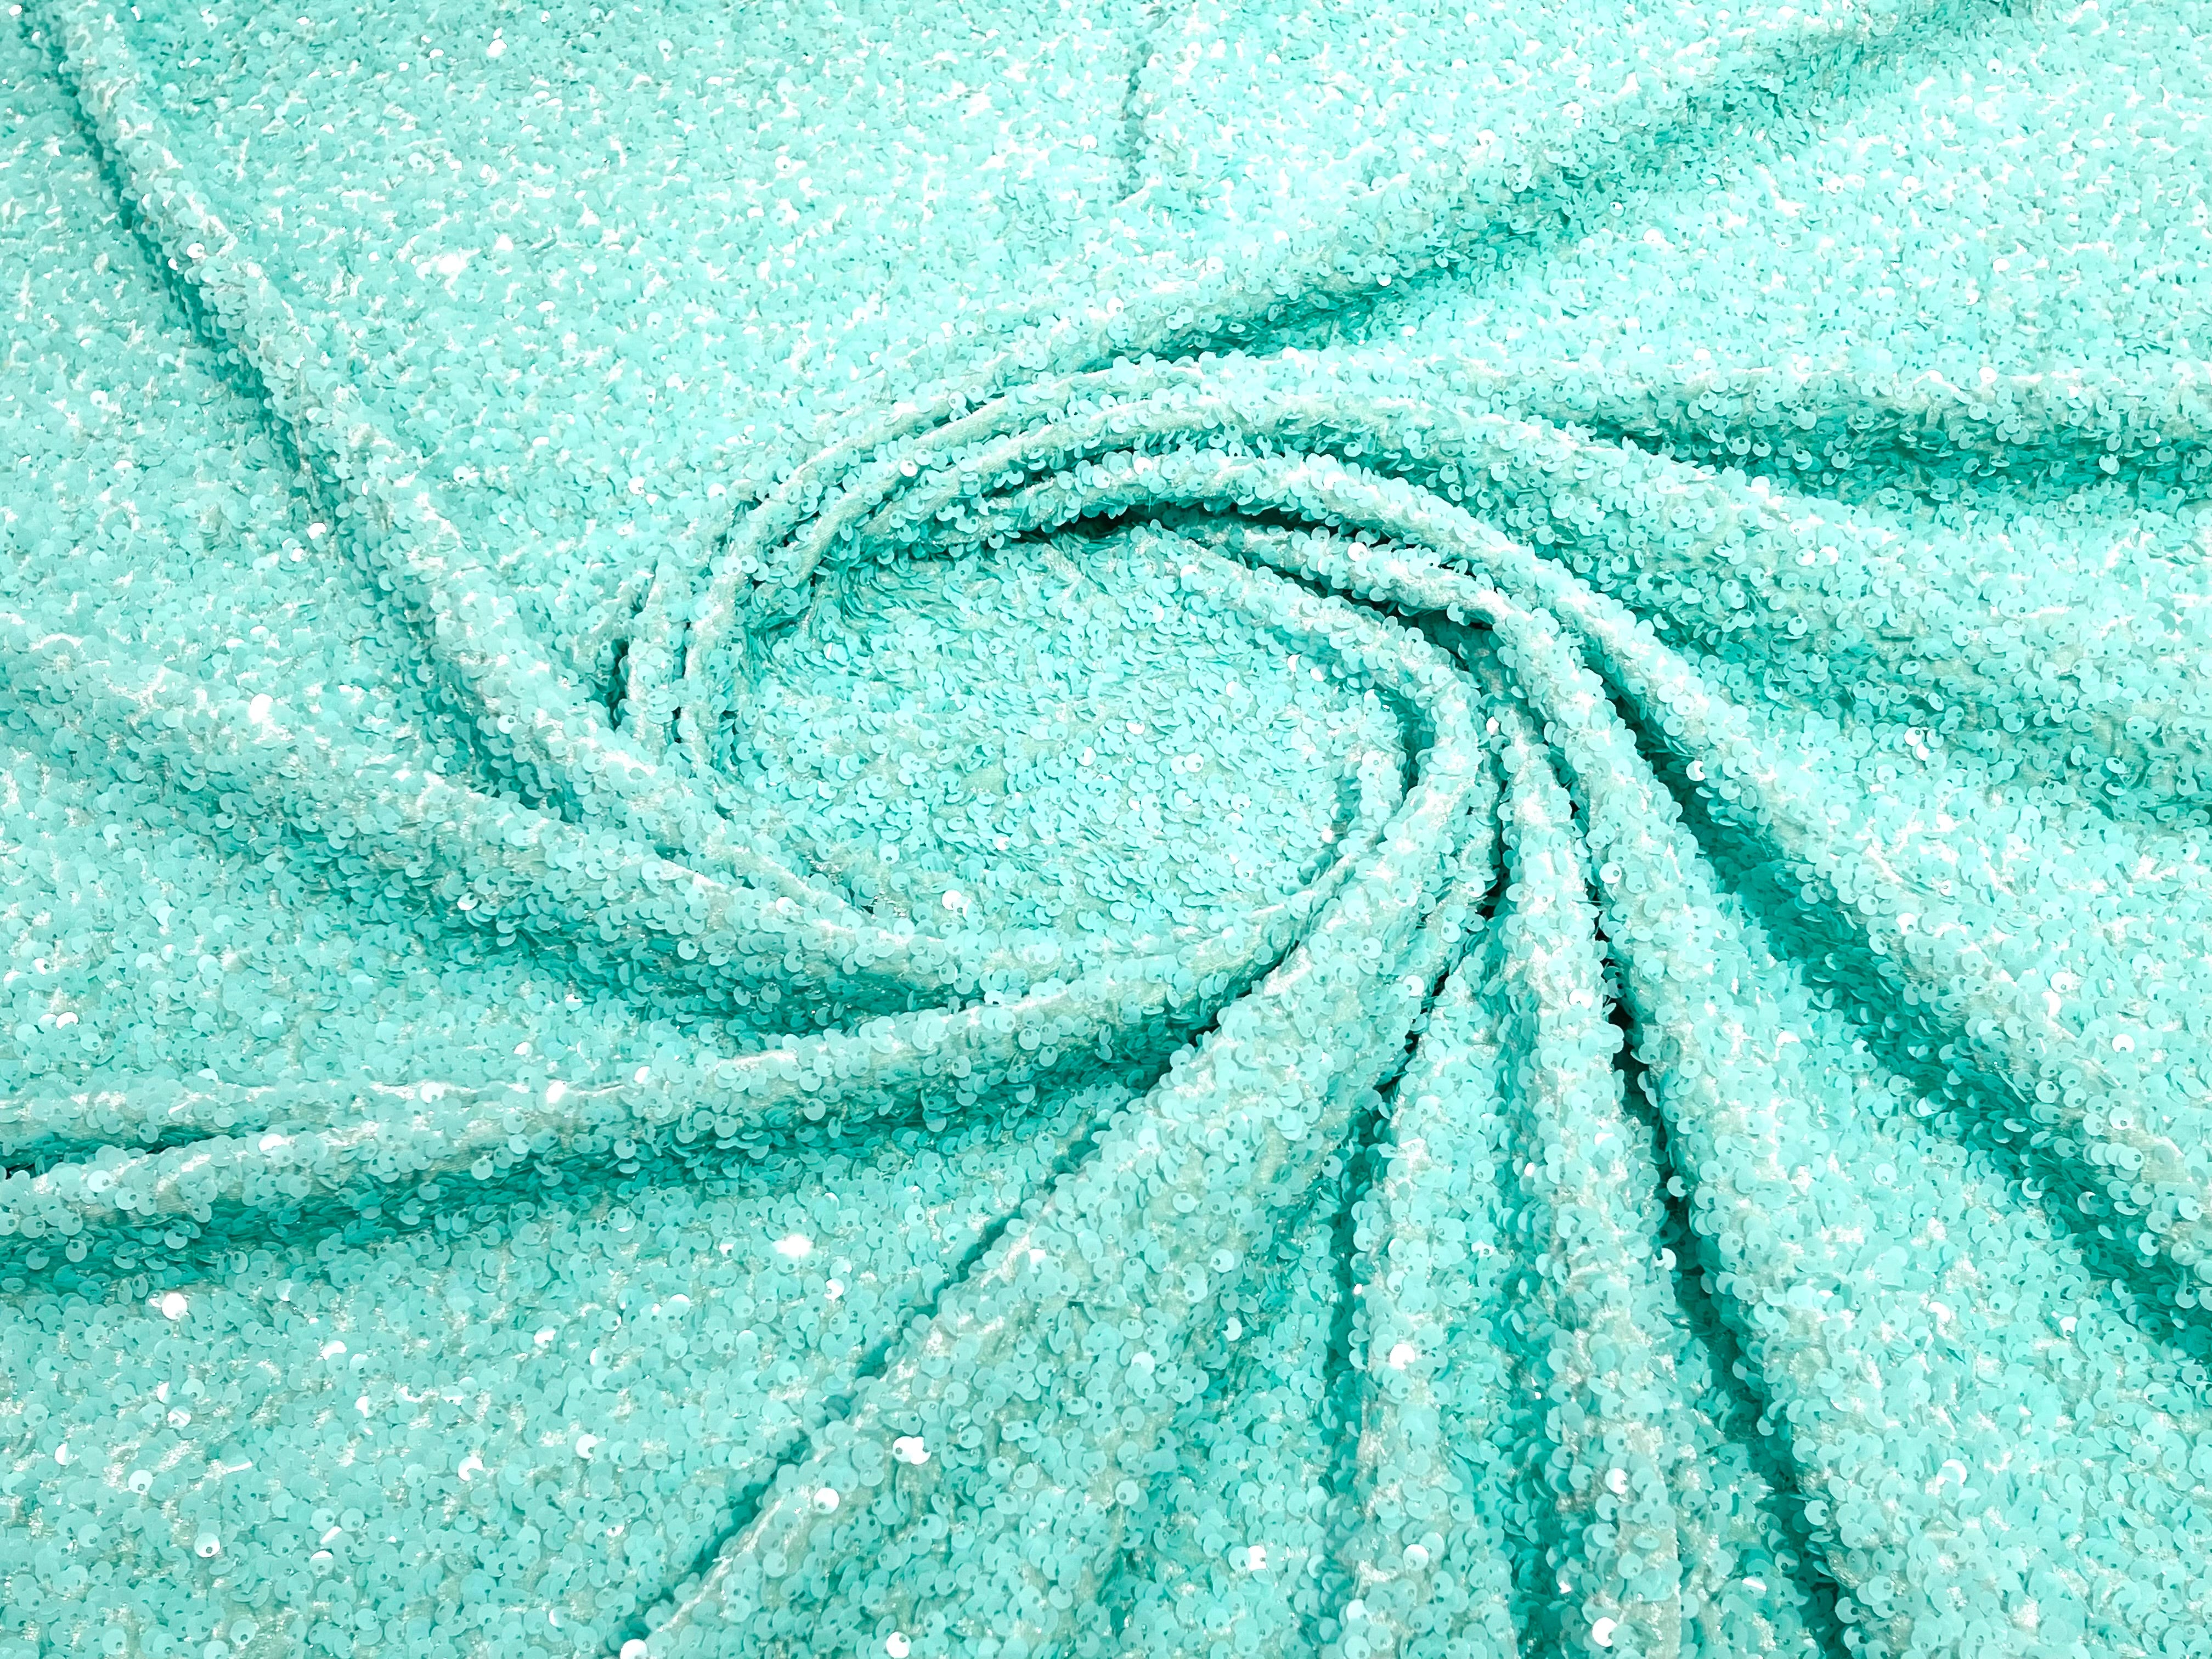 Sequin Velvet Stretch 5mm fabric 58"Wide-Prom-Nightgown fabric- Sold by the yard.